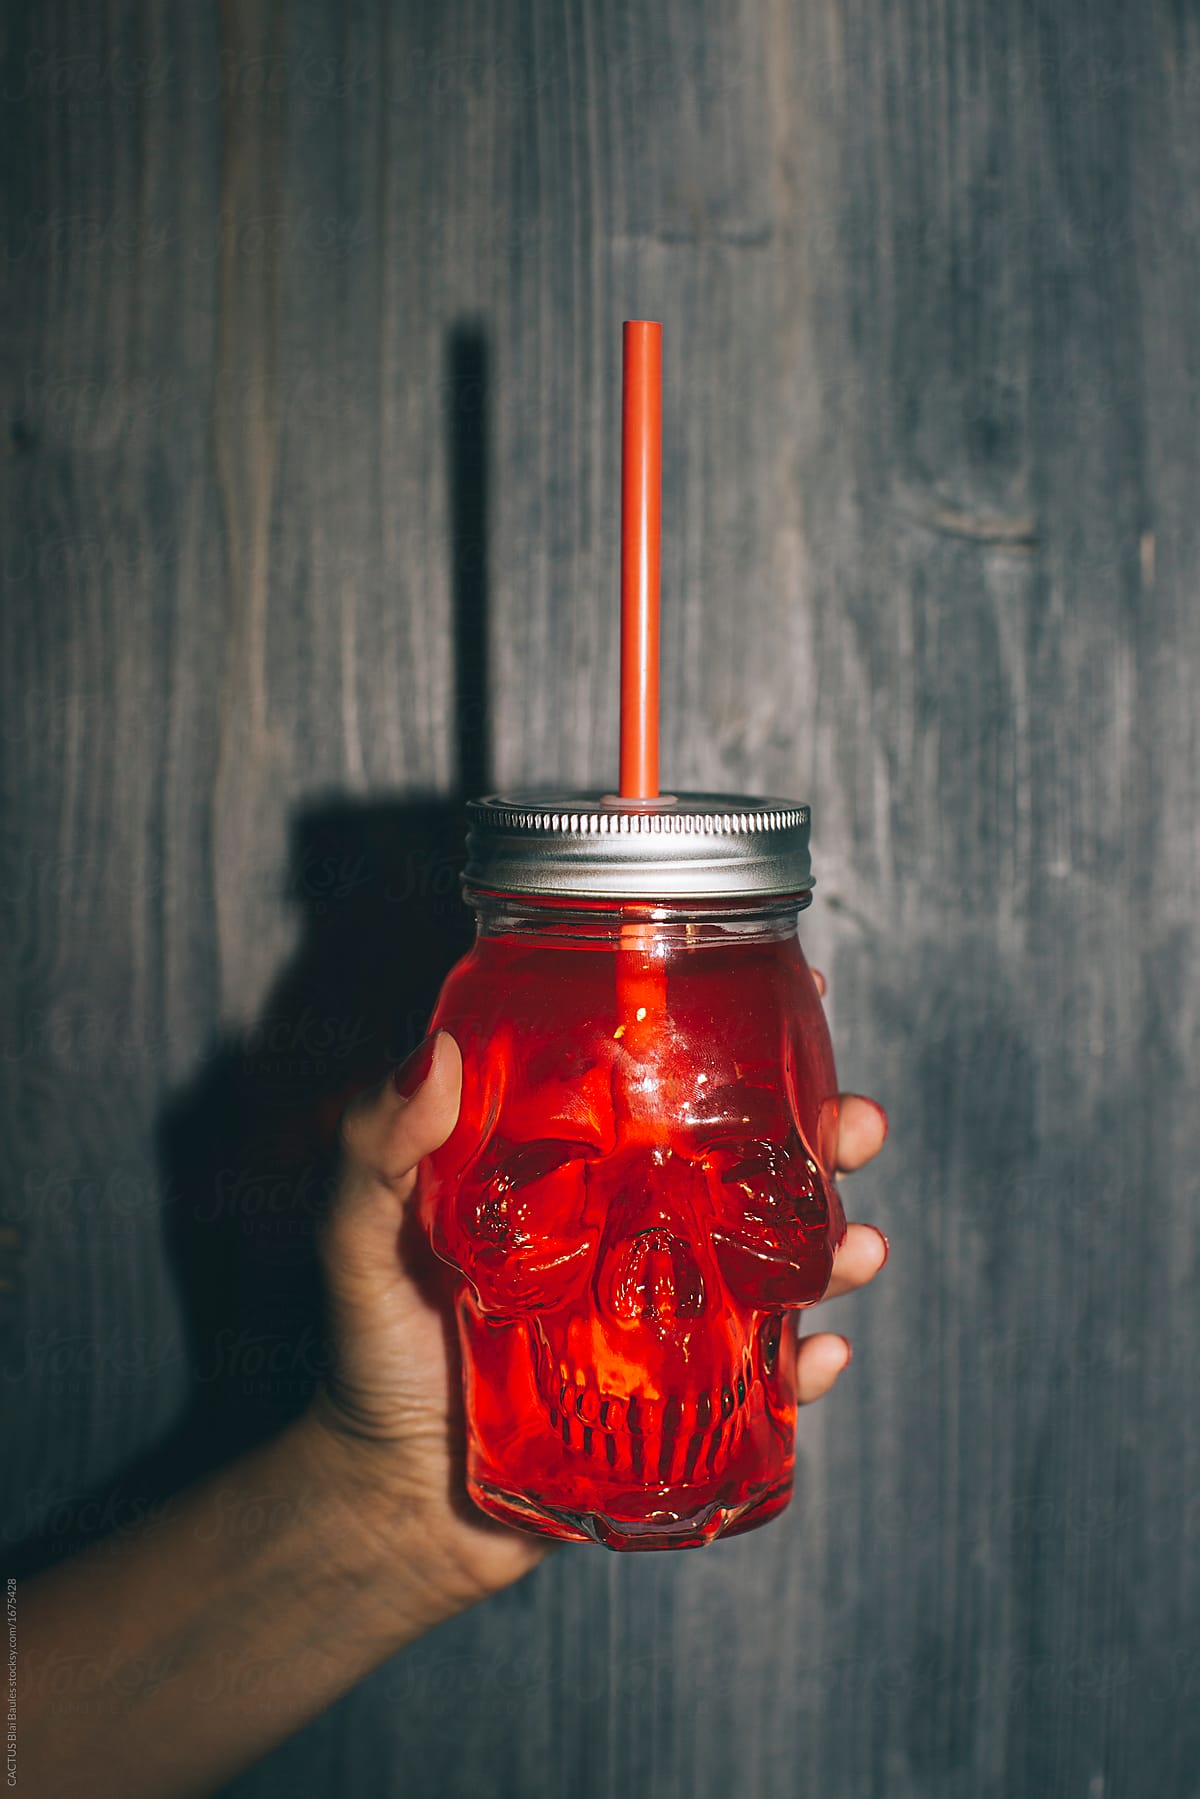 Skull shaped glass with red drink inside